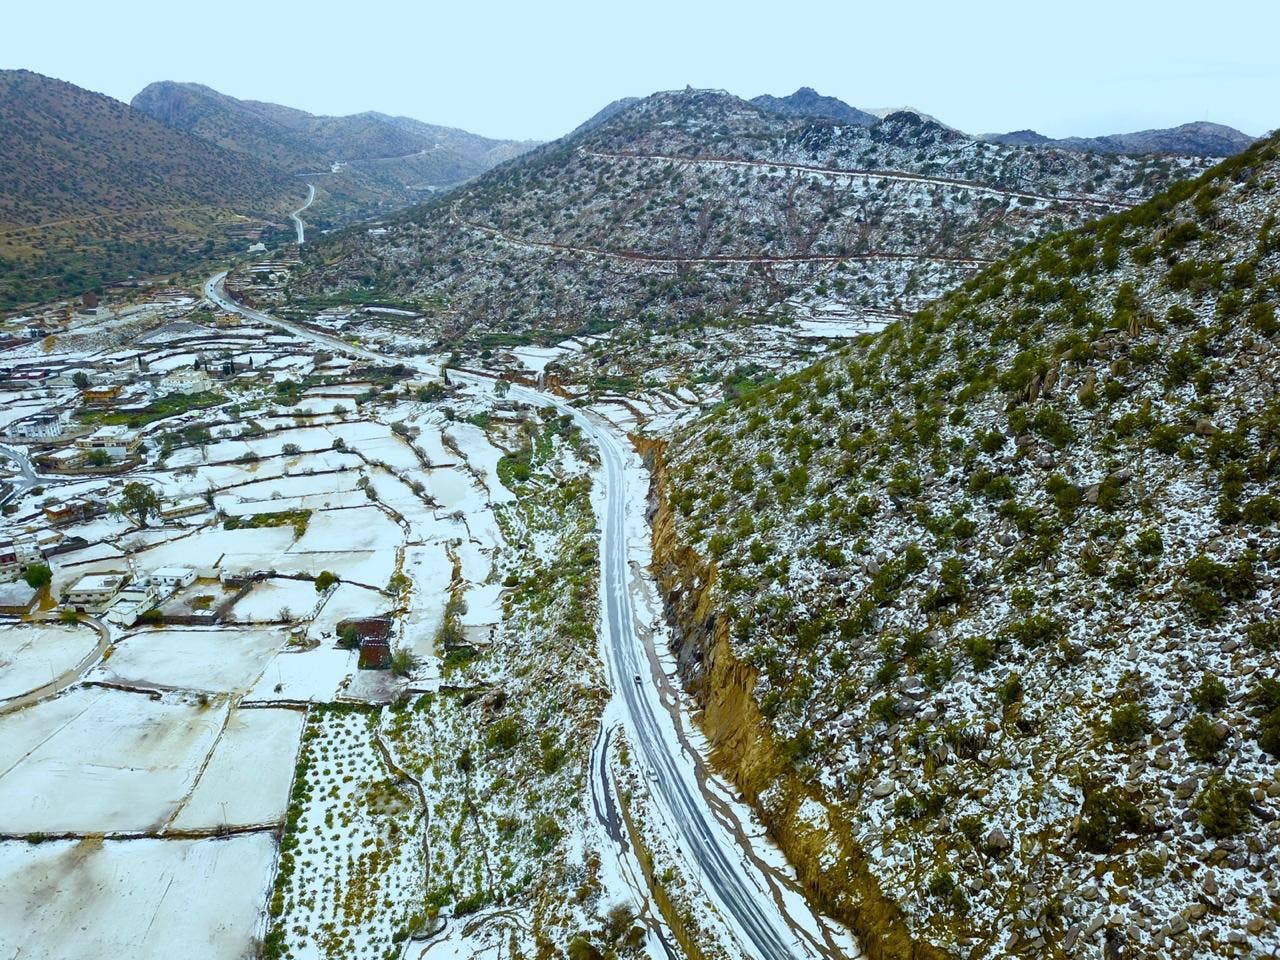 Snow in Maysan governorate, Mecca. (Supplied)